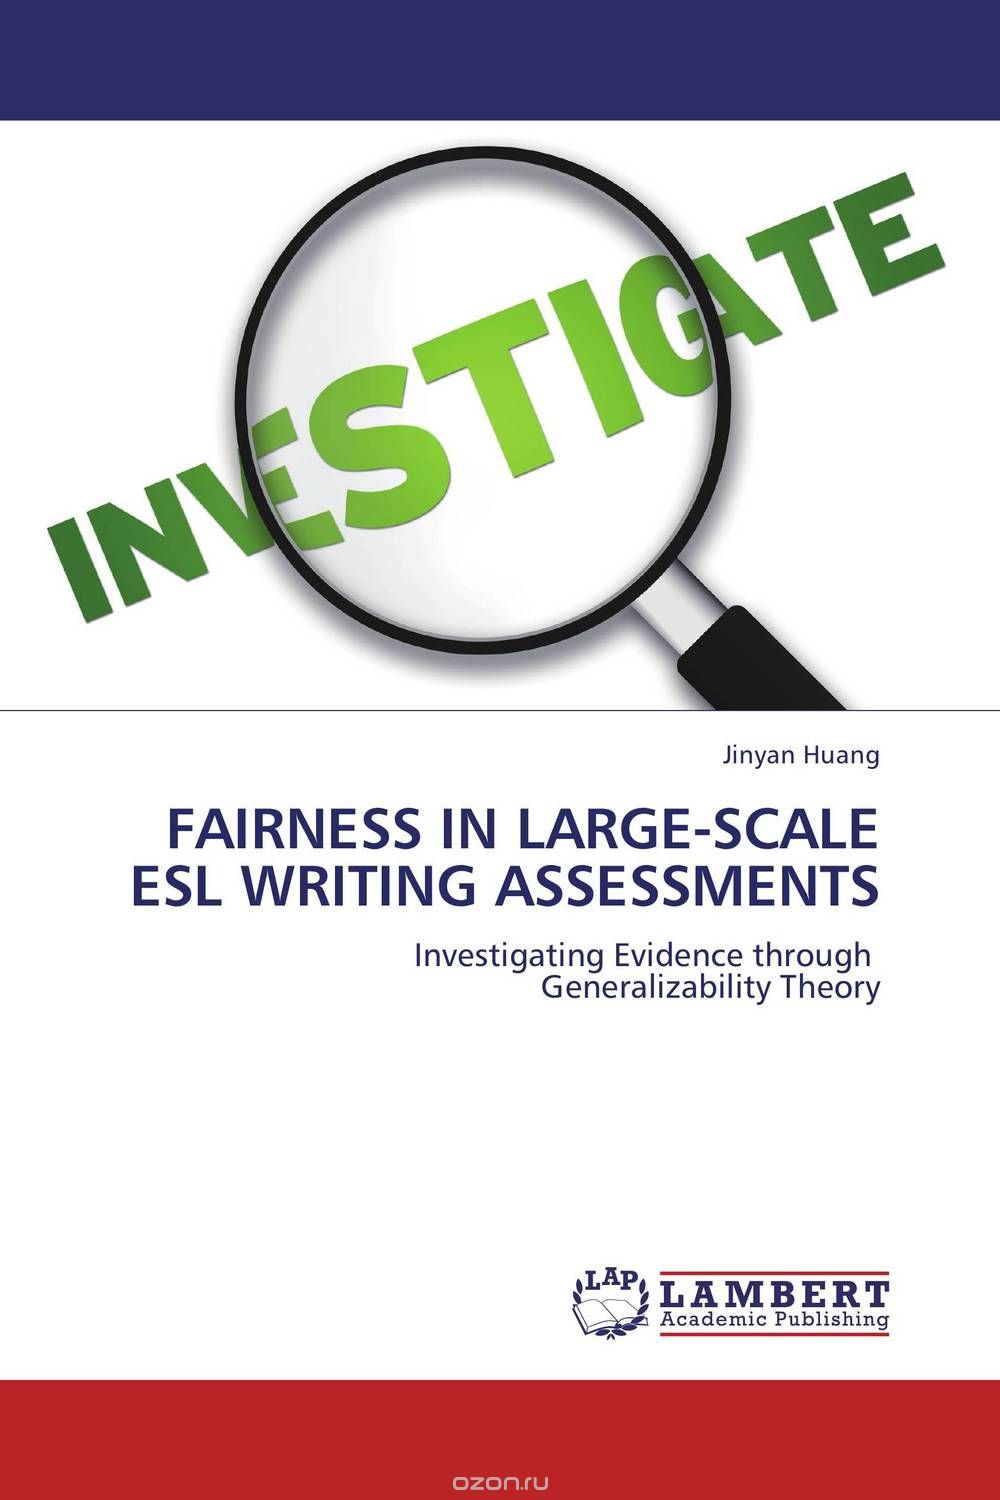 FAIRNESS IN LARGE-SCALE ESL WRITING ASSESSMENTS